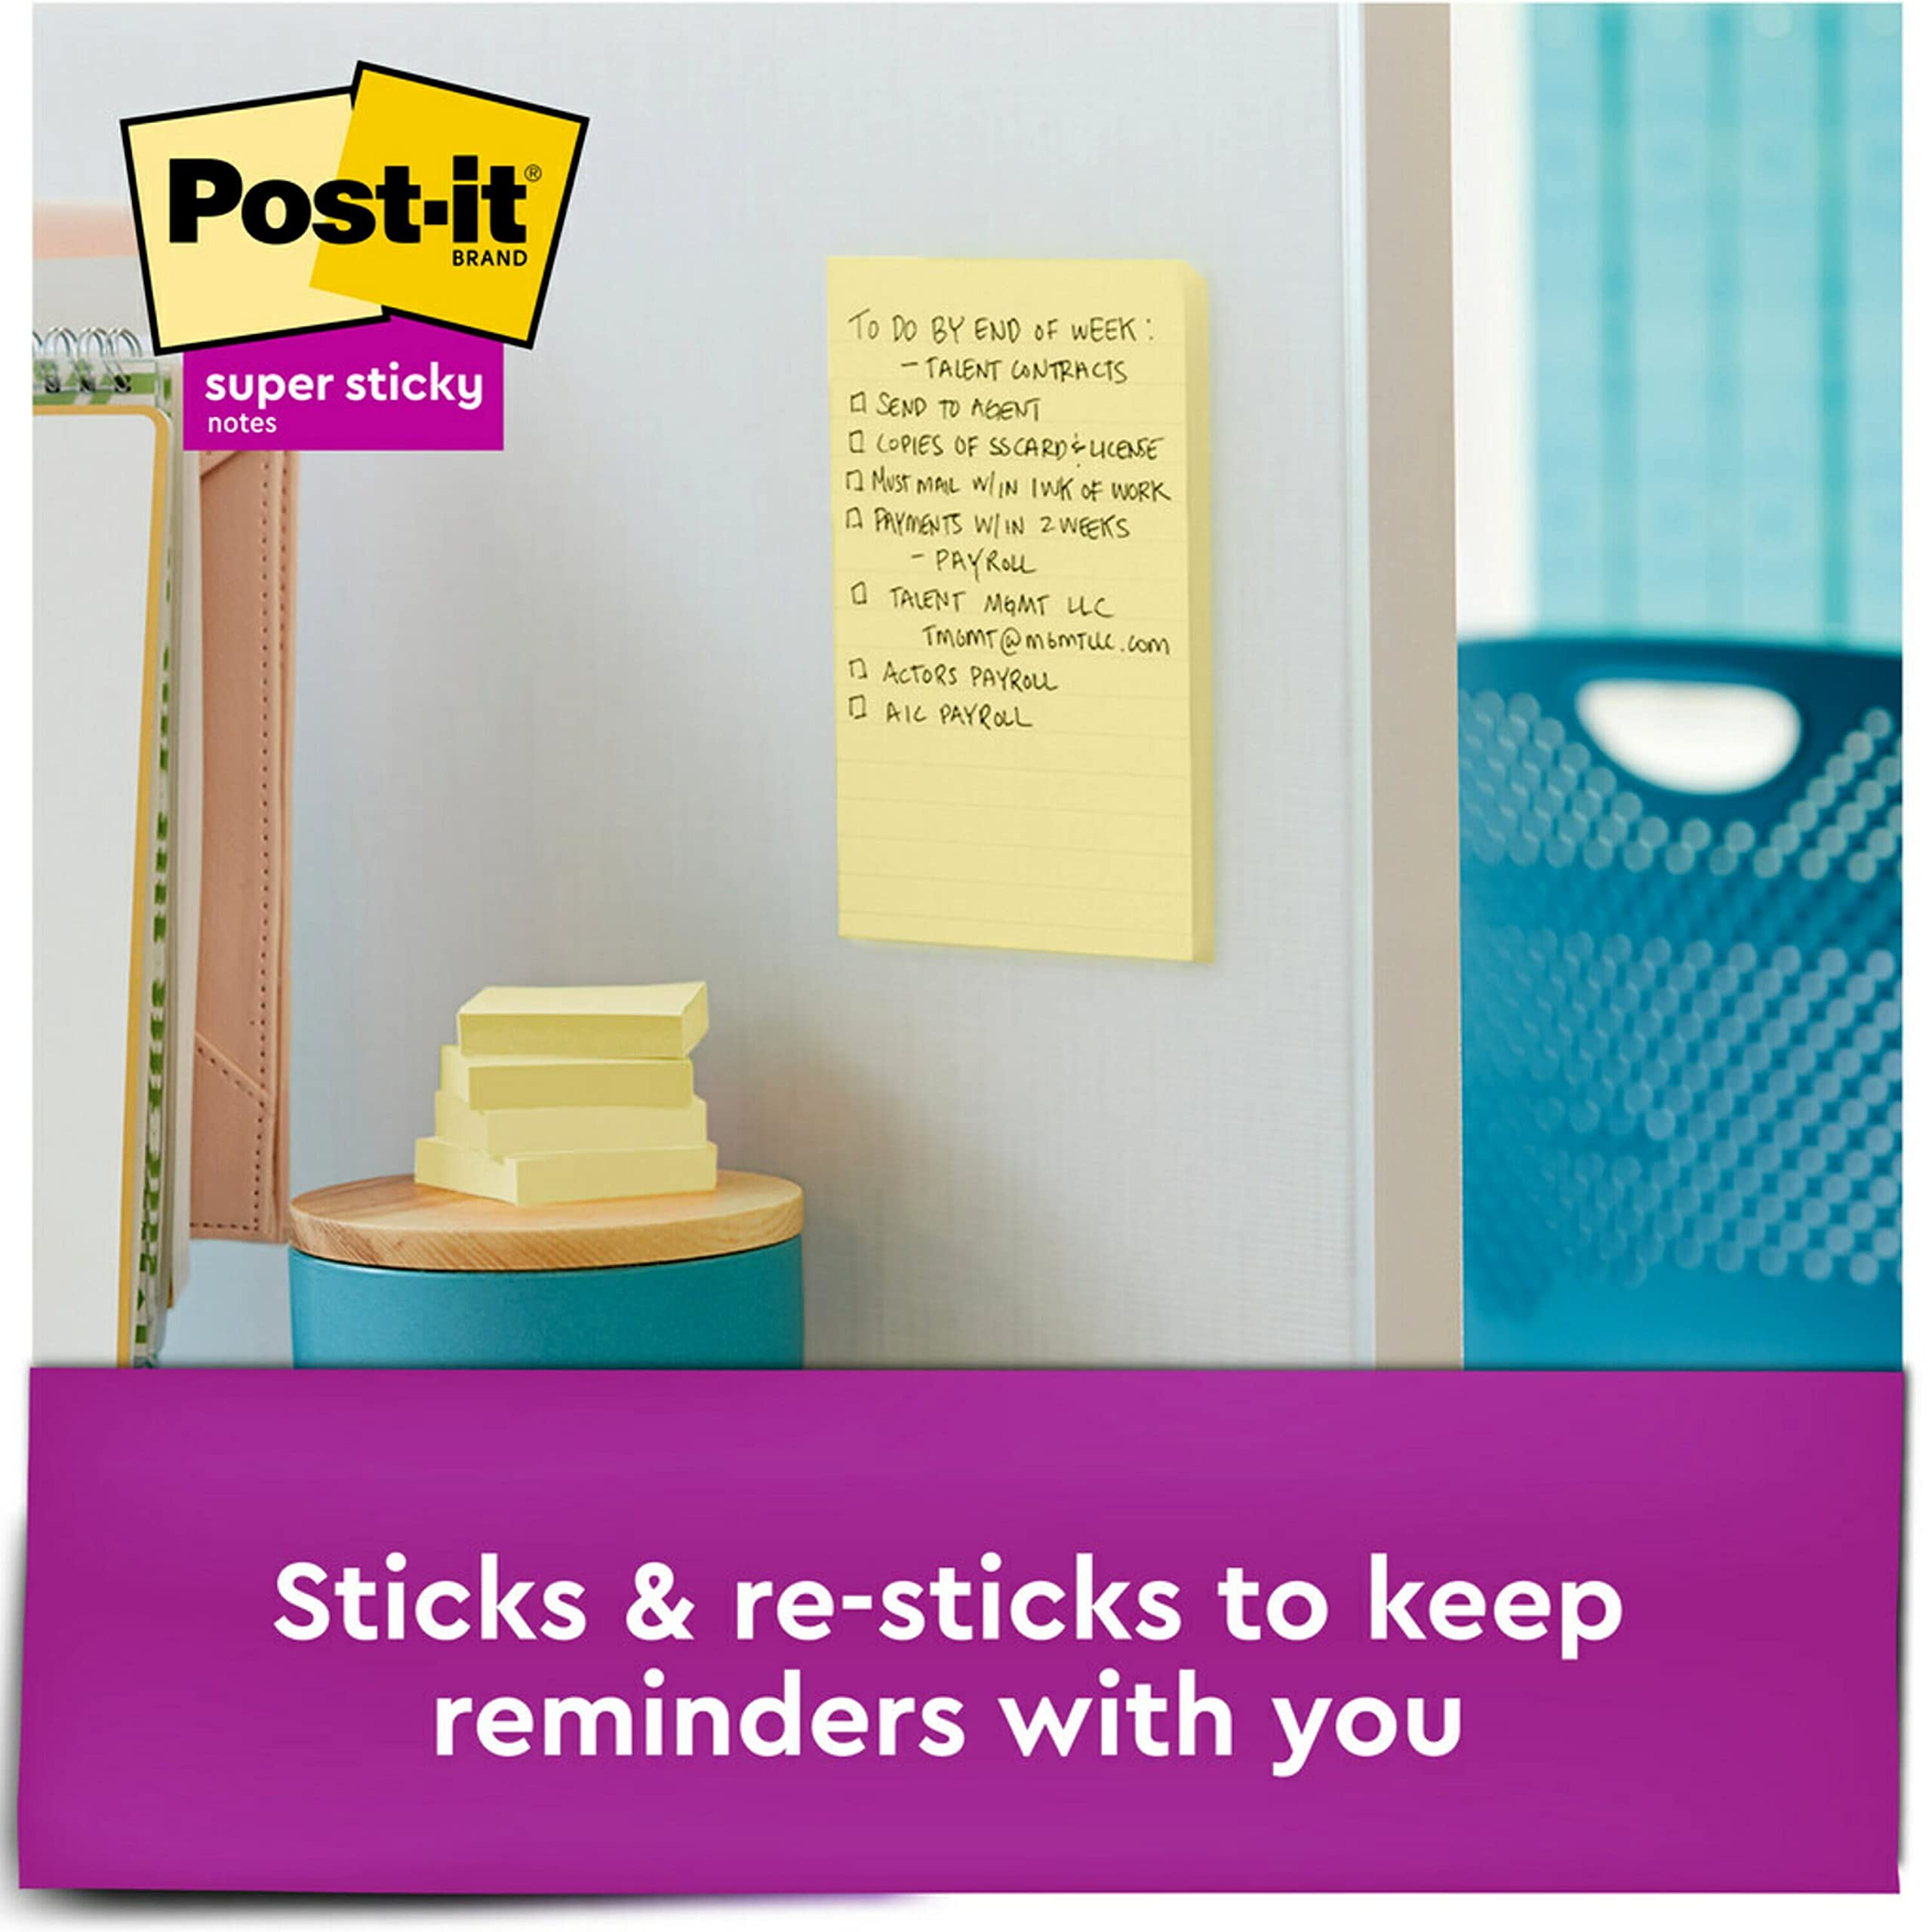 Post-it Super Sticky Notes, 4x6 in, 5 Pads, 2x the Sticking Power, Canary Yellow, Recyclable (660-5SSCY)